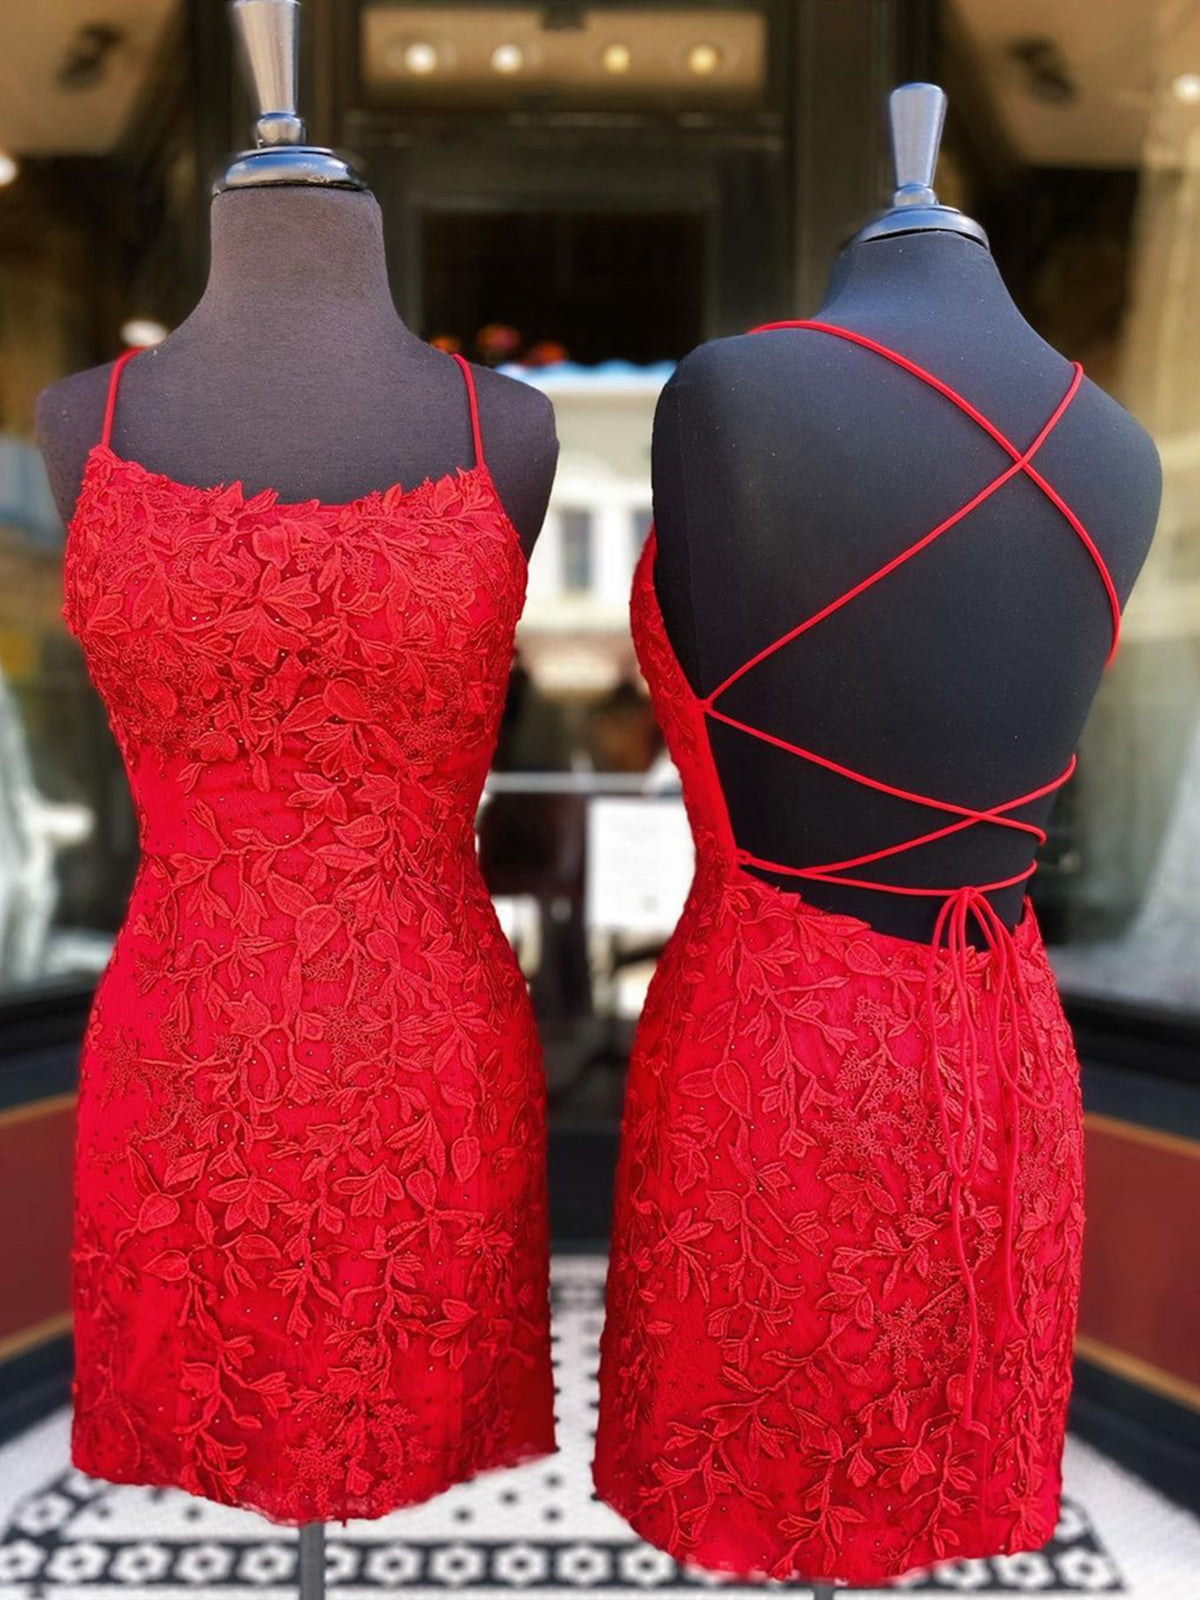 Party Dresses Summer Dresses, Short Red Backless Lace Prom Dresses, Short Backless Red Lace Graduation Homecoming Dresses